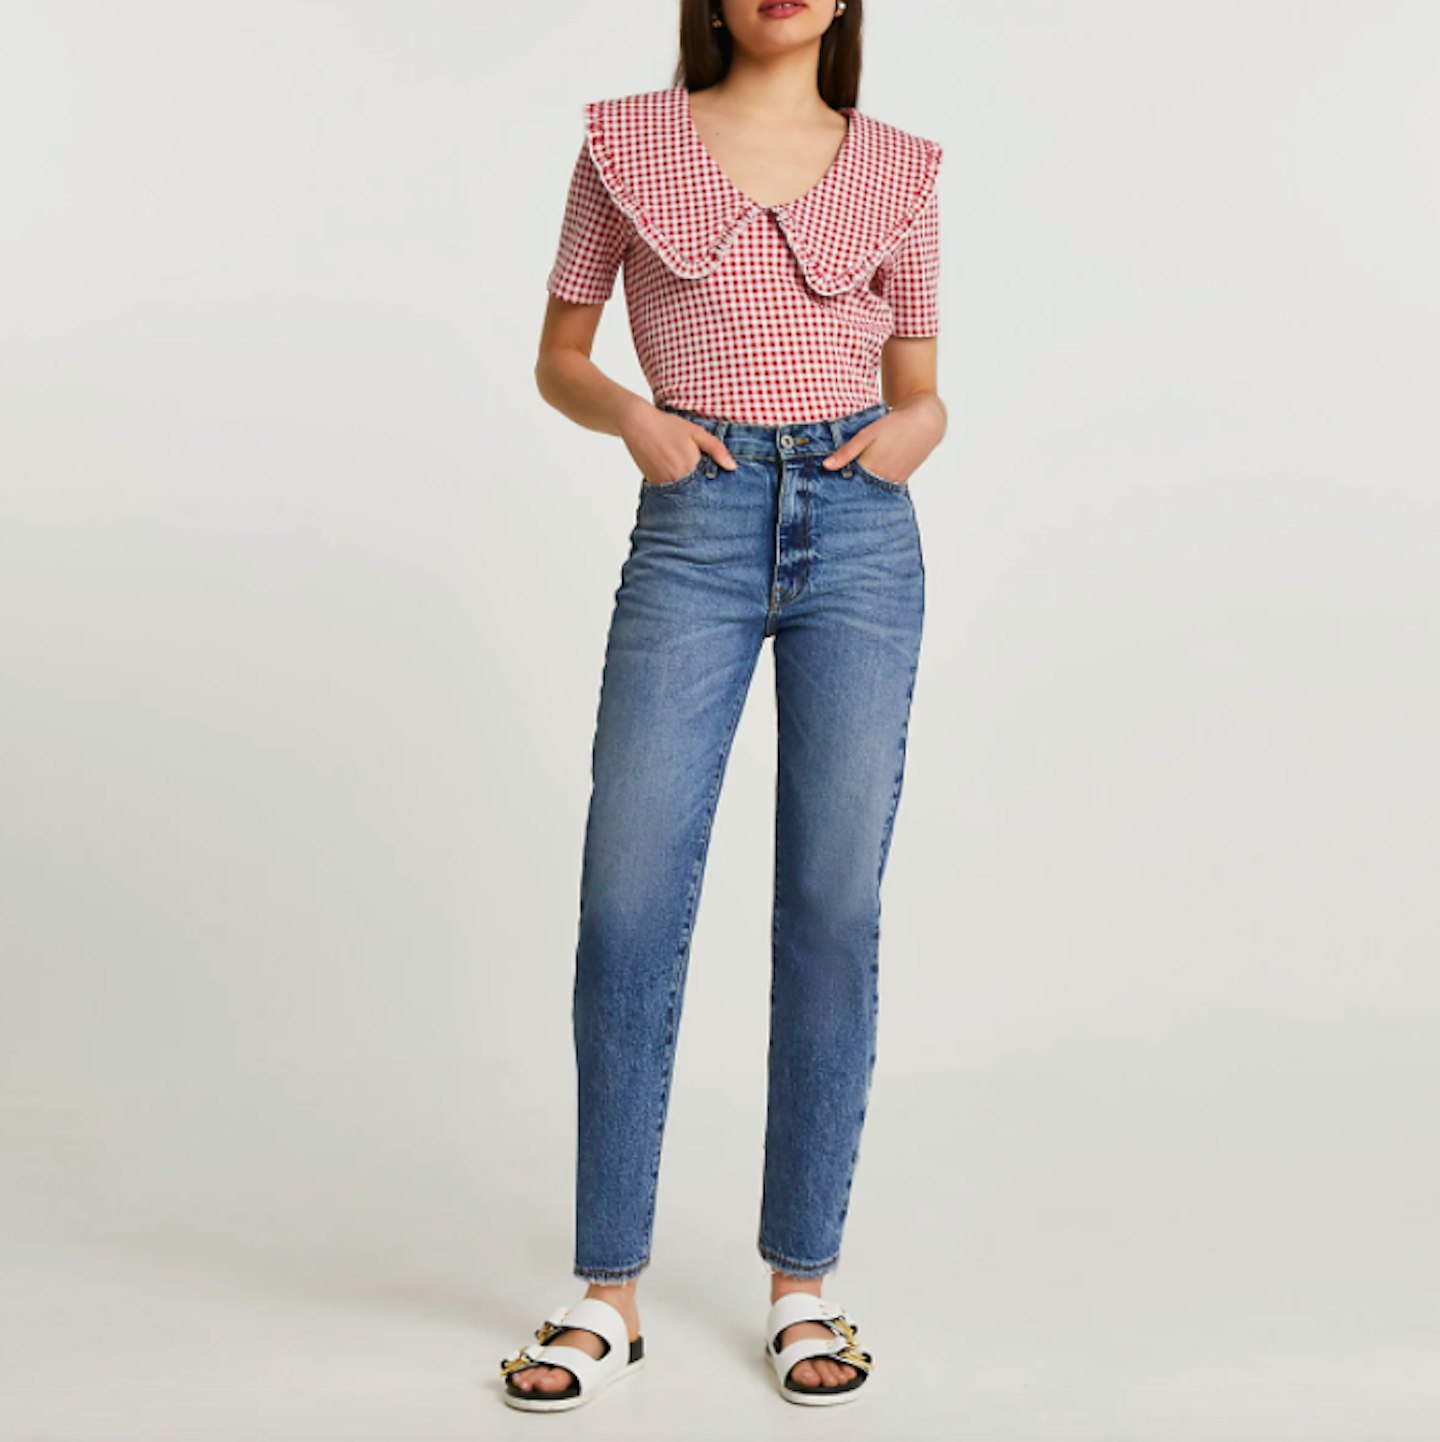 River Island, Gingham T-Shirt with Oversized Collar, £28